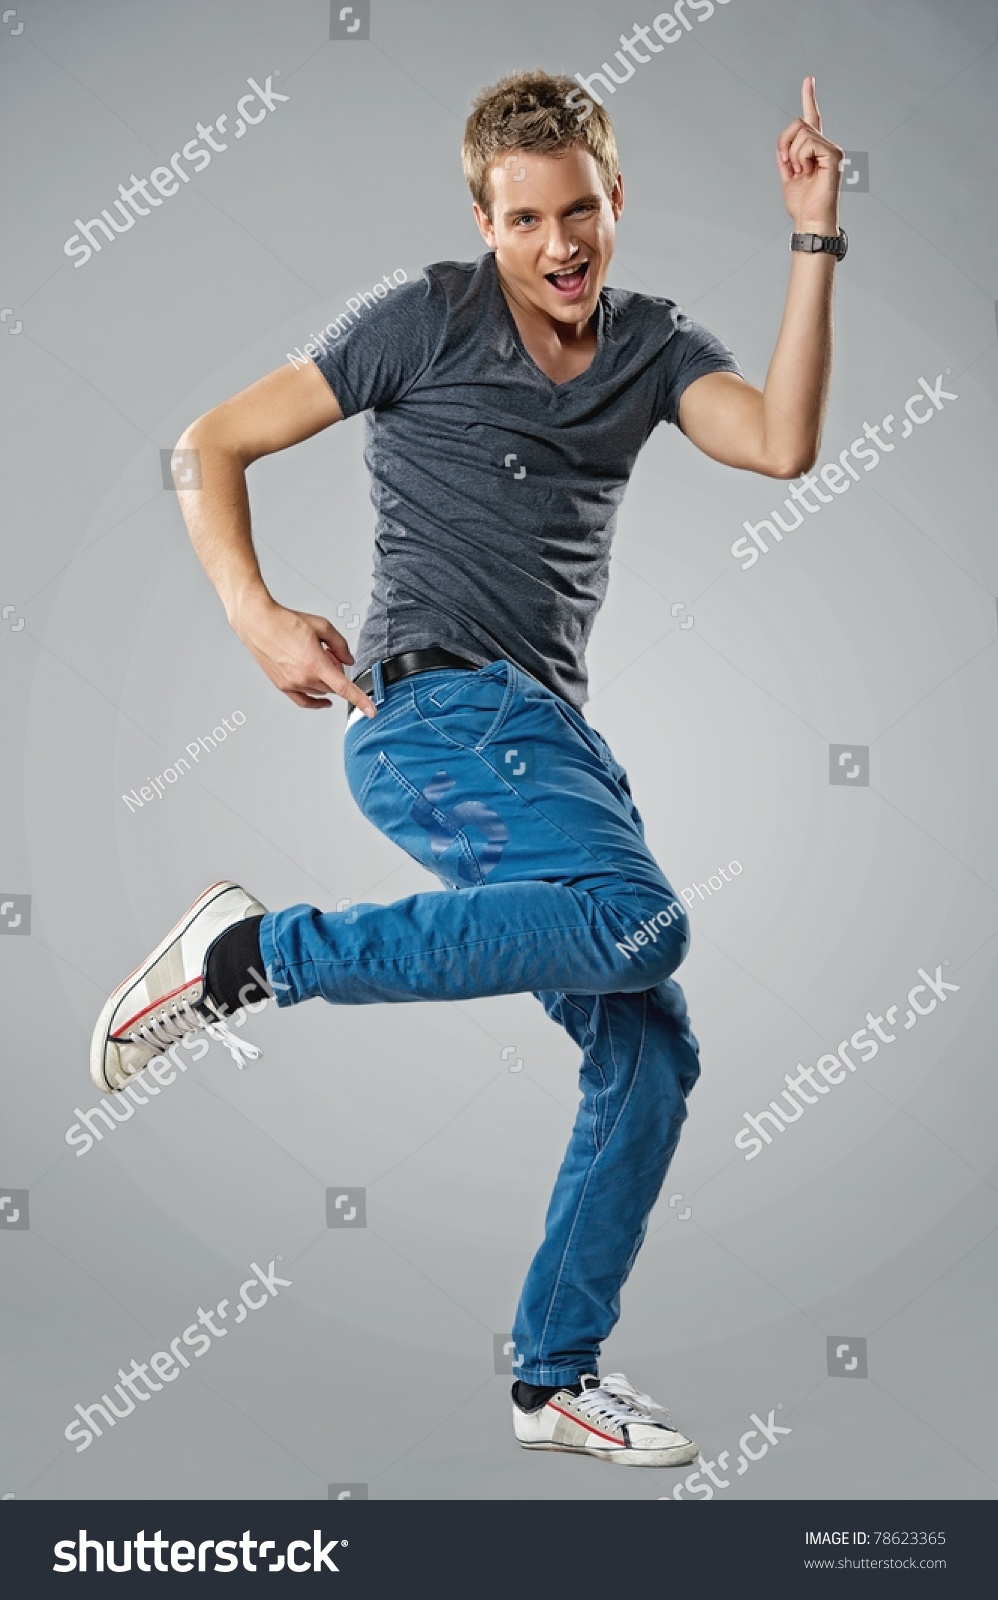 Handsome Young Man Dancing Stock Photo 78623365 : Shutterstock